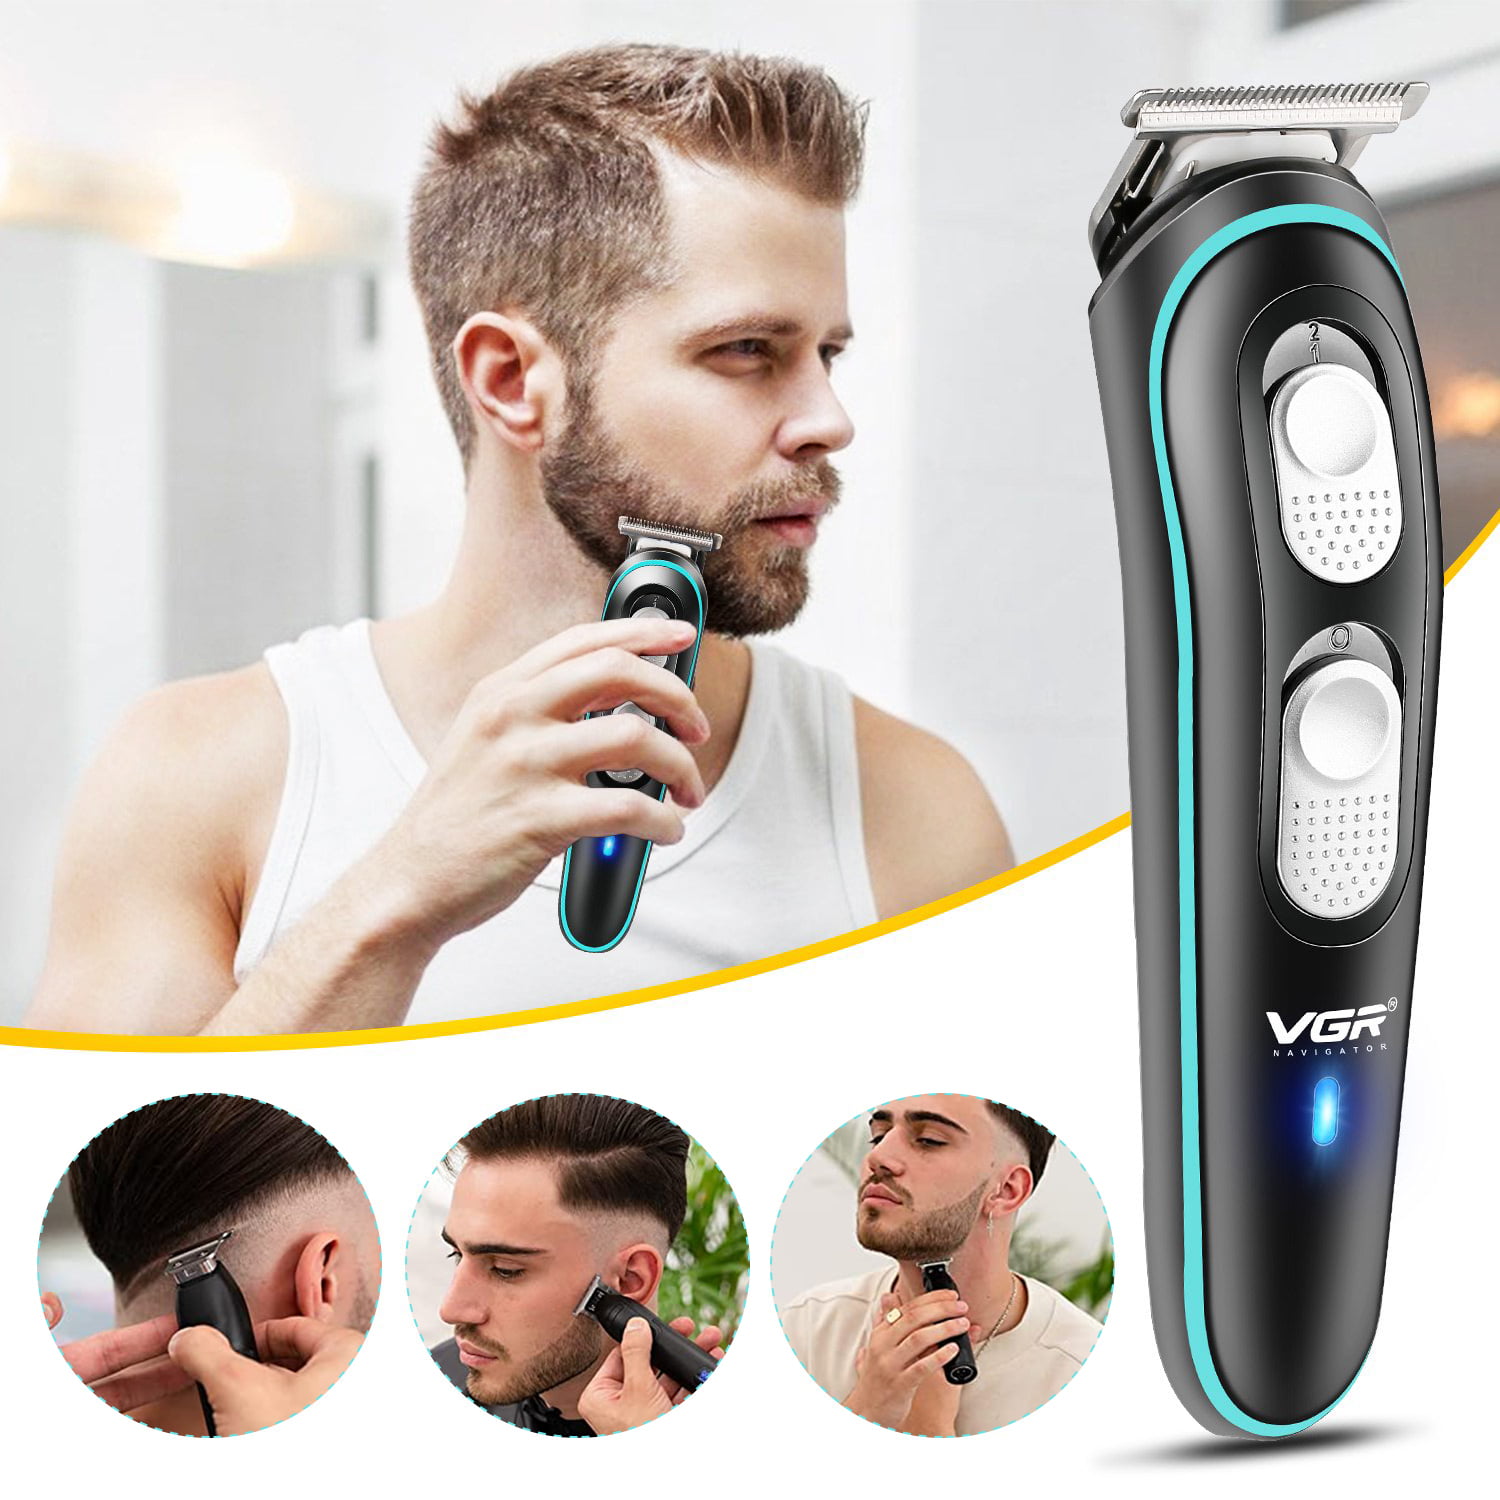 Cordless Hair Clippers Haircut Machine Trimmer Kit Set for Men Professional Barber Supplies Hair Cutting Kit Barber Accessories Hair Clipper M並行輸入